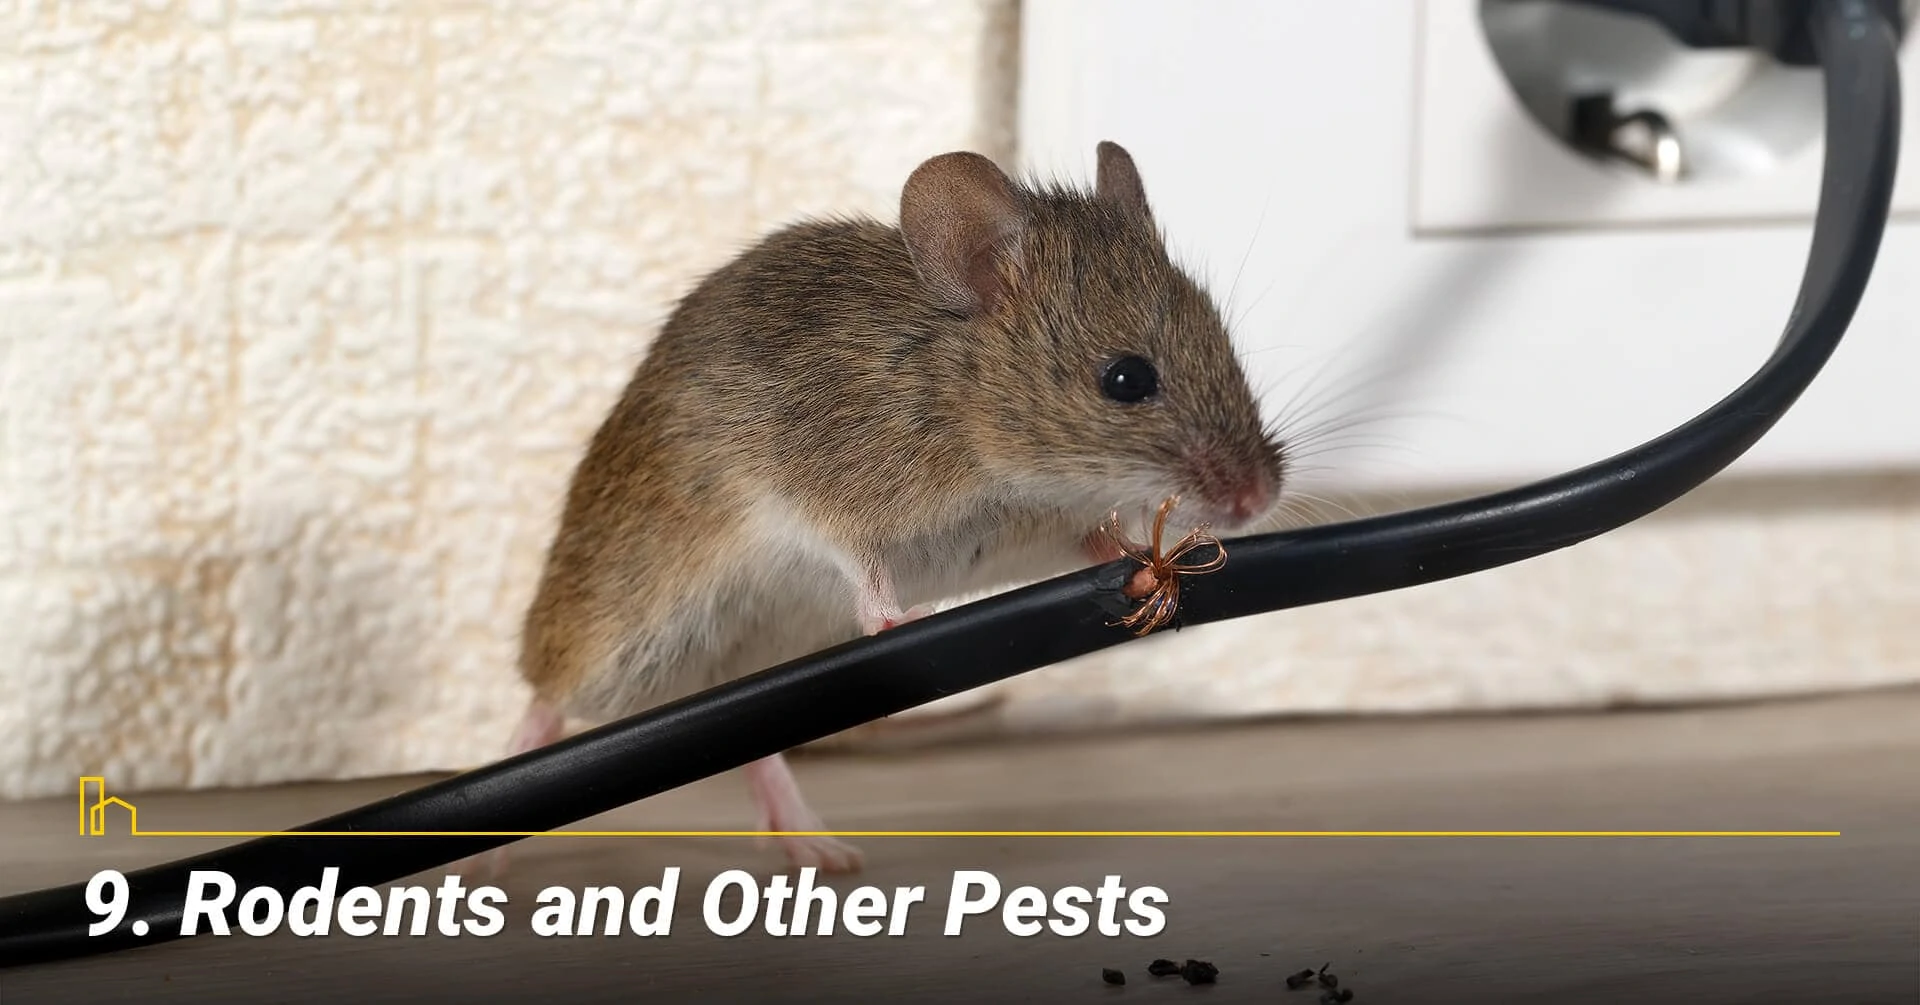 Rodents and Other Pests, unwanted pests around the house